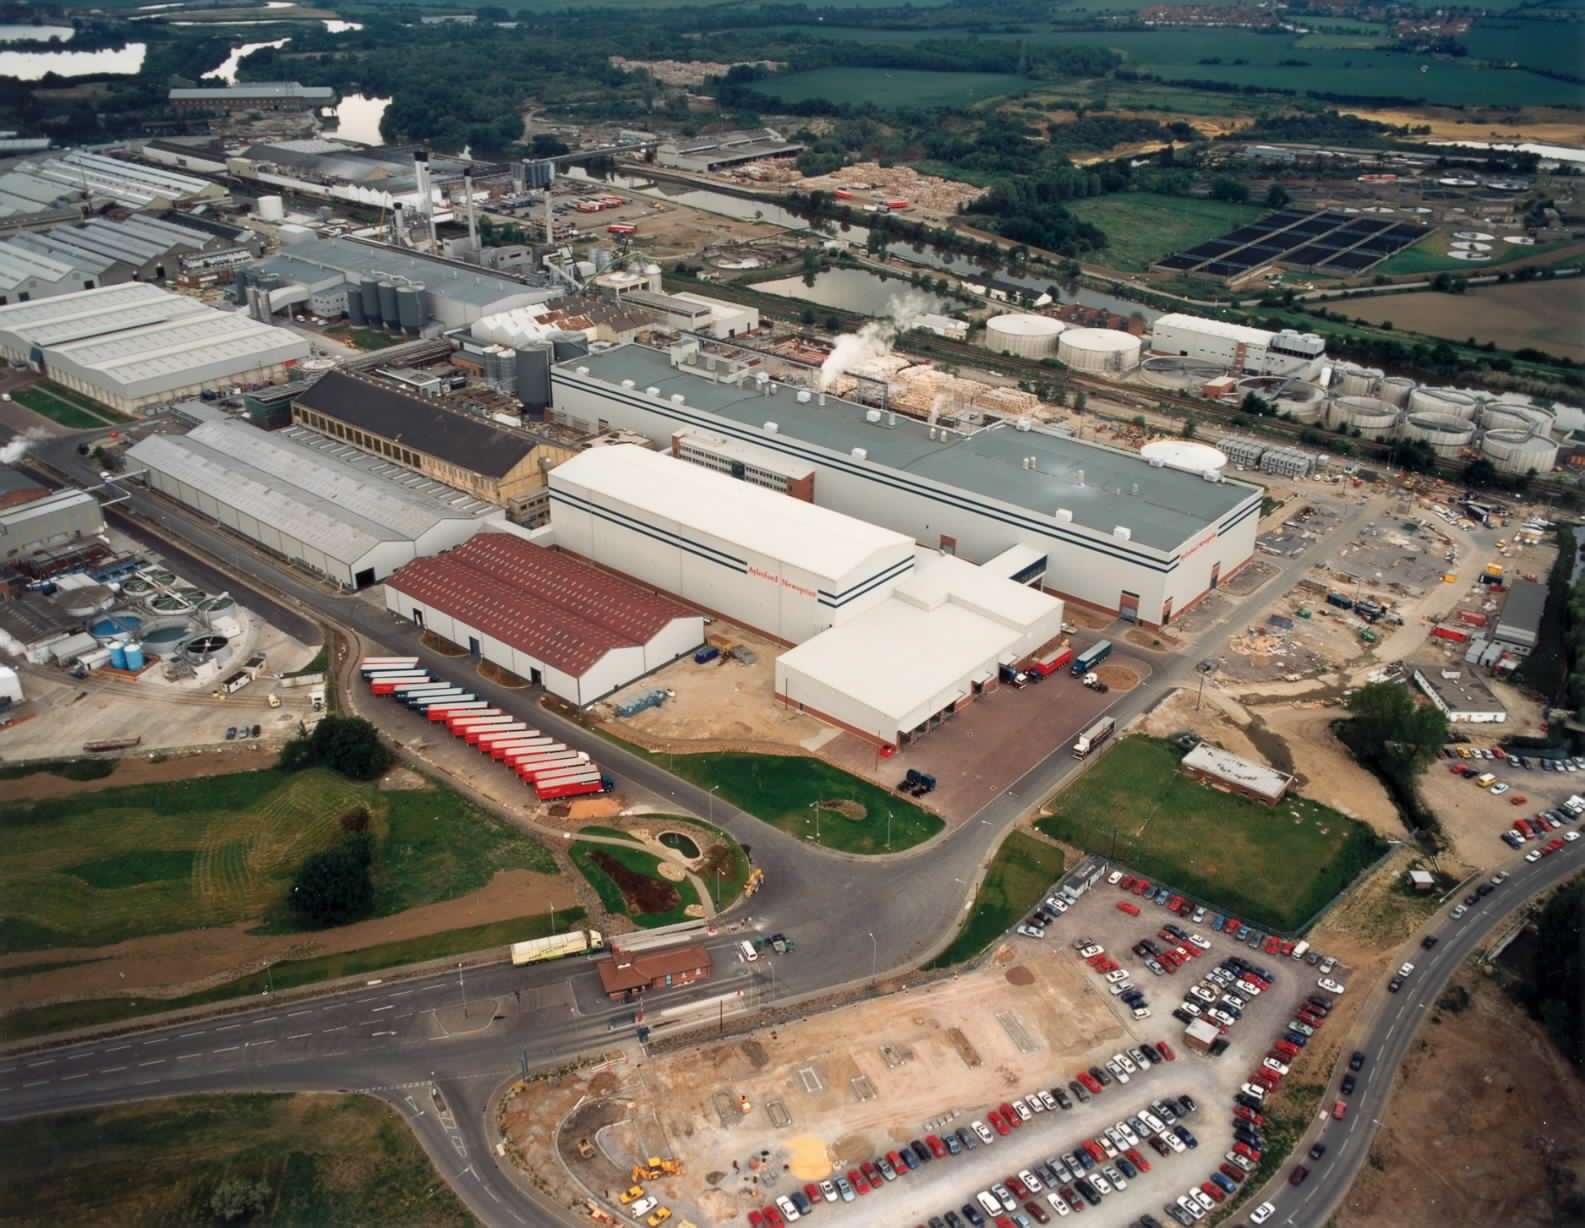 The massive Aylesford Newsprint site pictured in 1995.